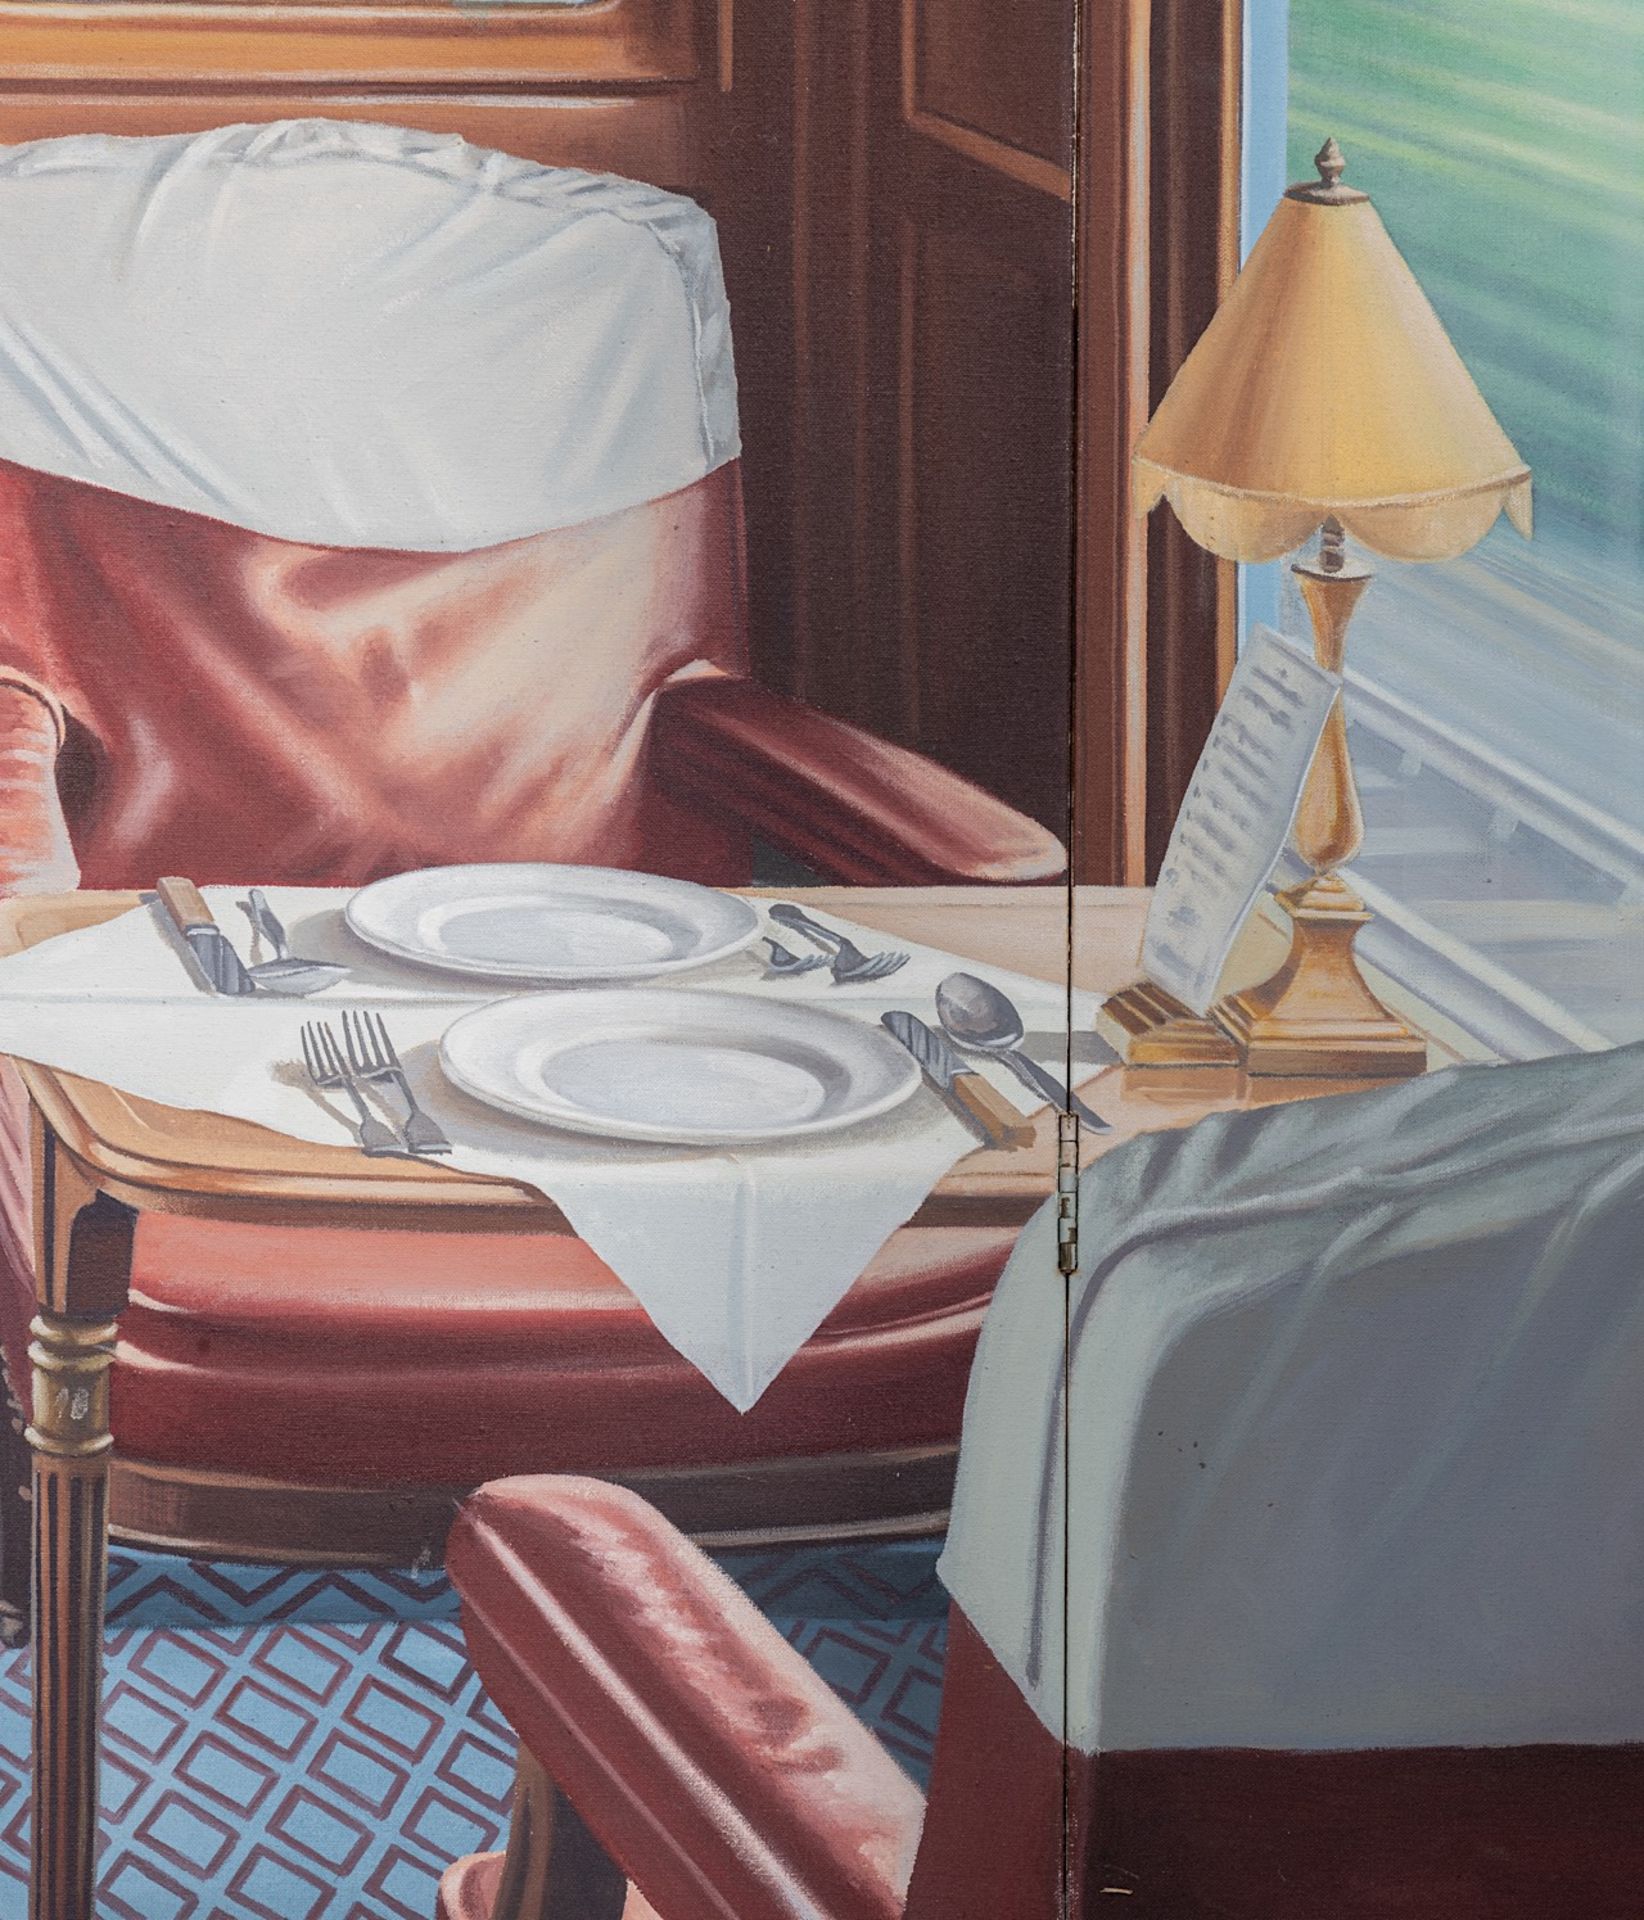 Giles Winter (1947), triptych of the interior of a train compartment, 1980, oil on canvas, 136 x 122 - Image 10 of 10